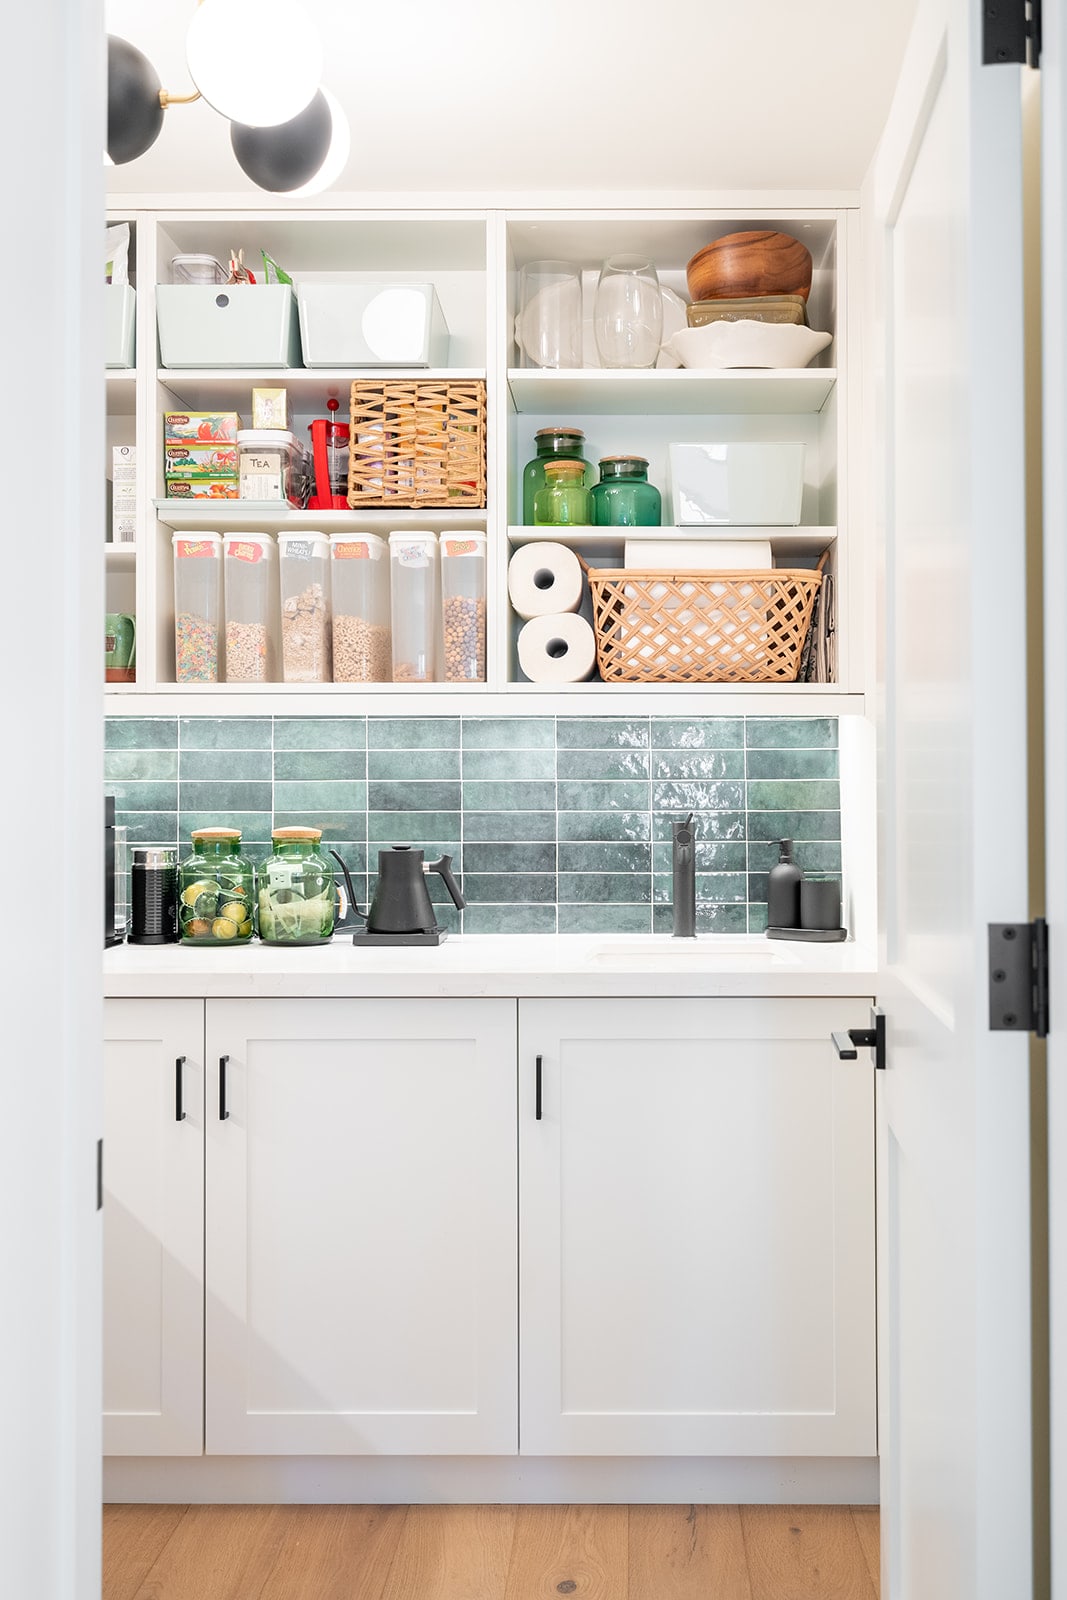 White pantry with open shelving and blue tile backsplash